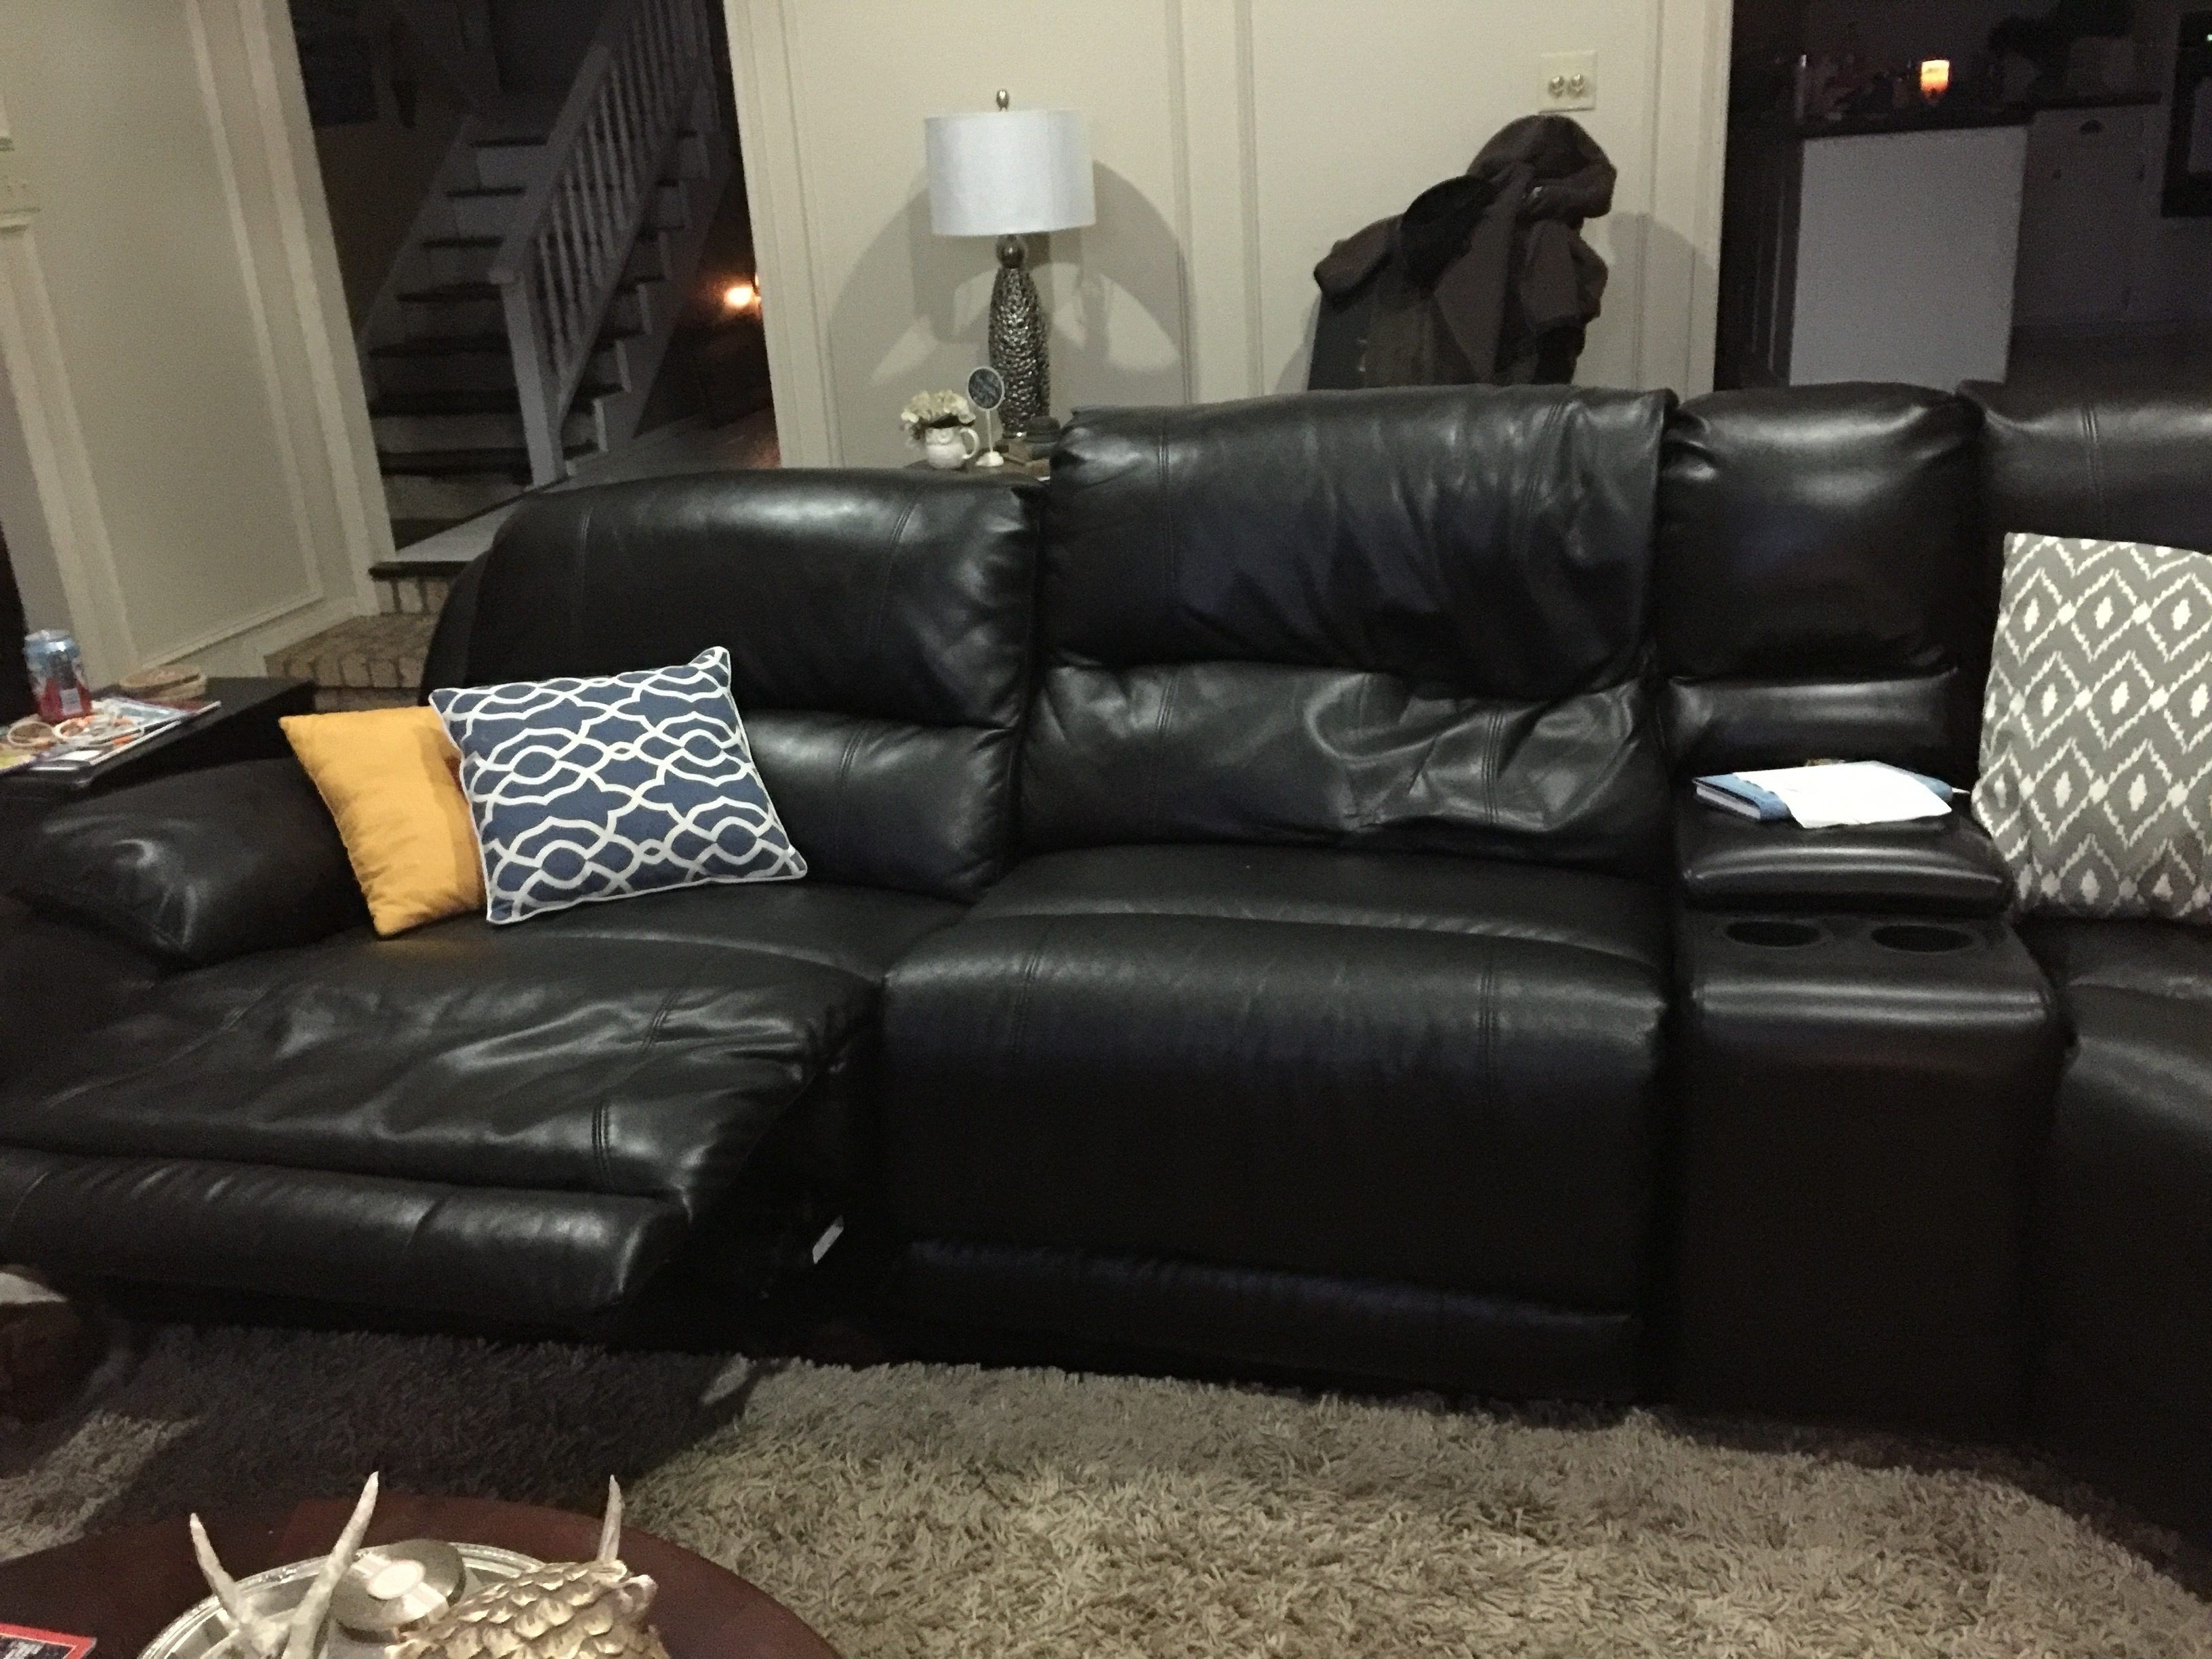 Sectional Sofa: Sectional Sofas On Craigslist Church Chairs For With Regard To Most Current Everett Wa Sectional Sofas (View 6 of 20)